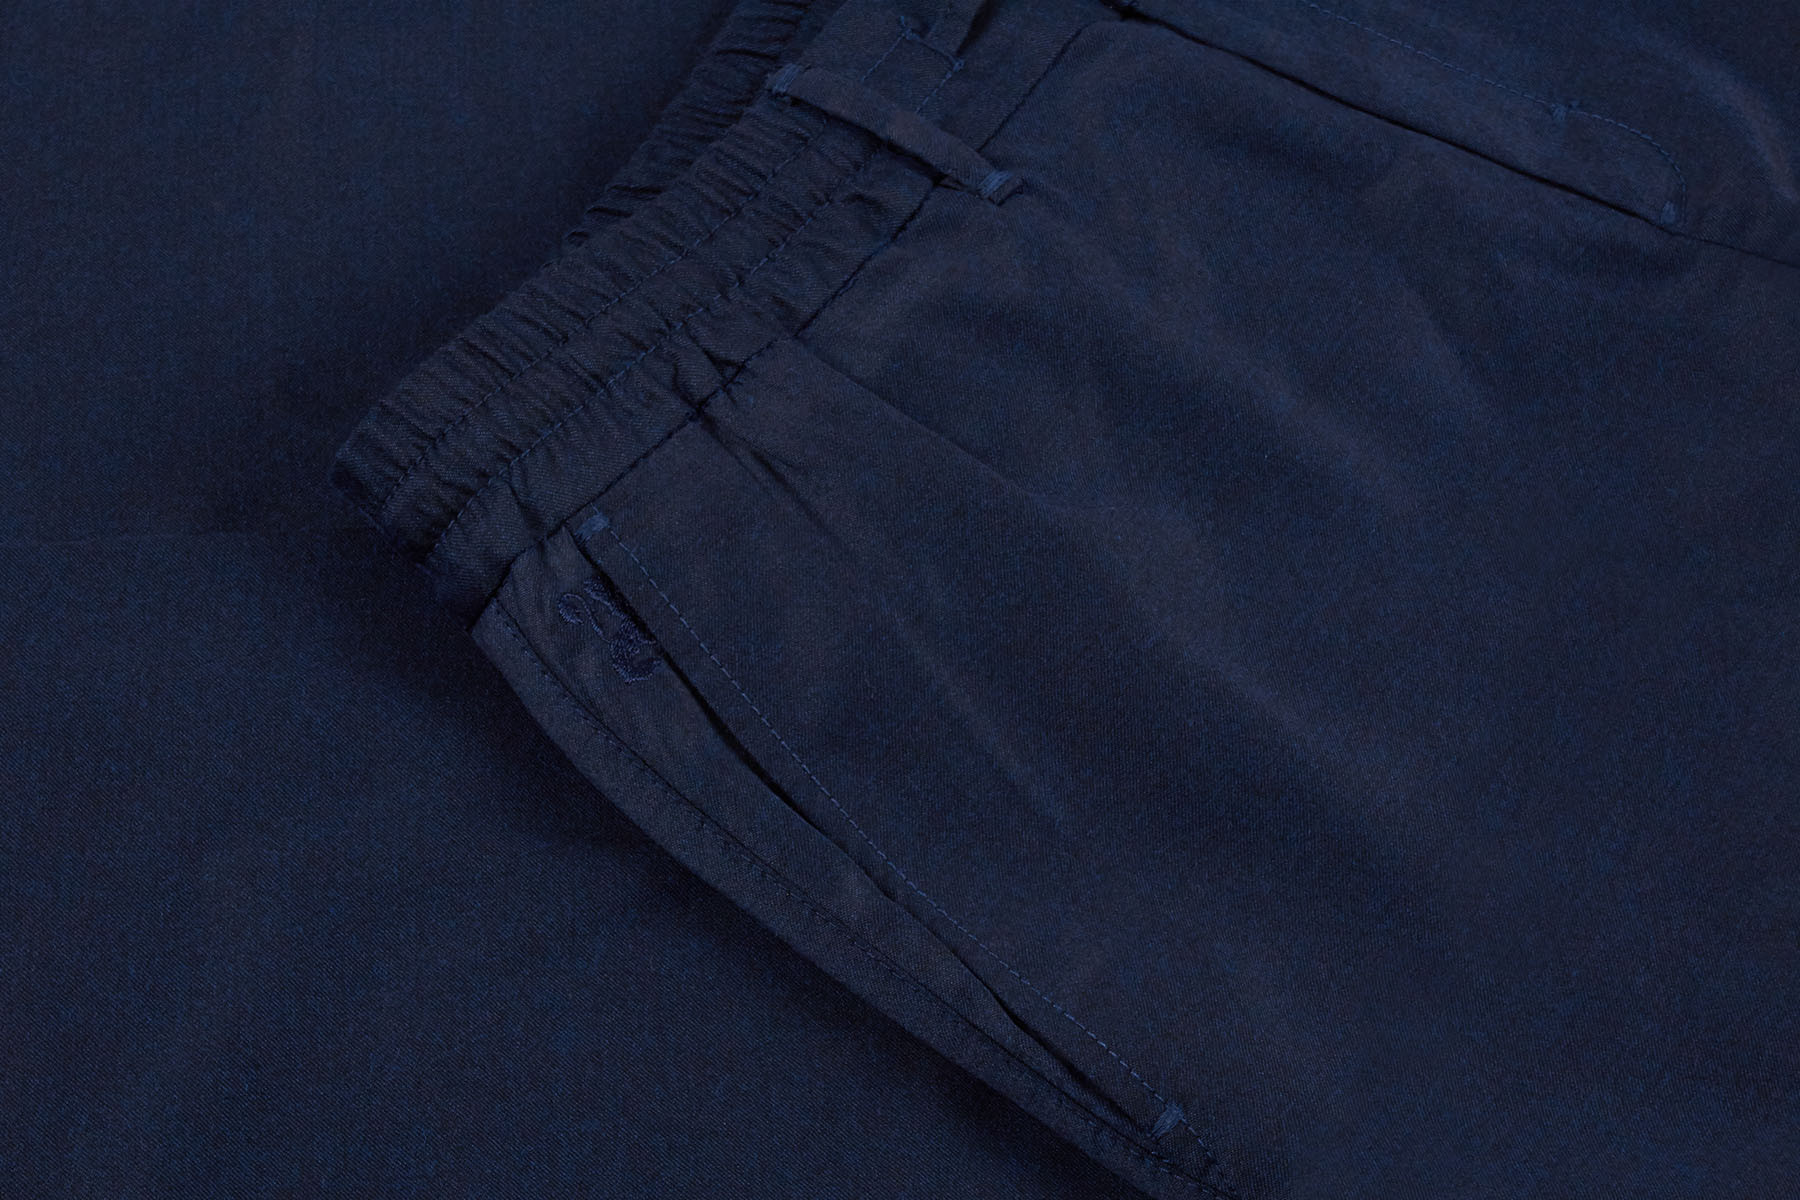 Blue trousers, slim fit, jogging style